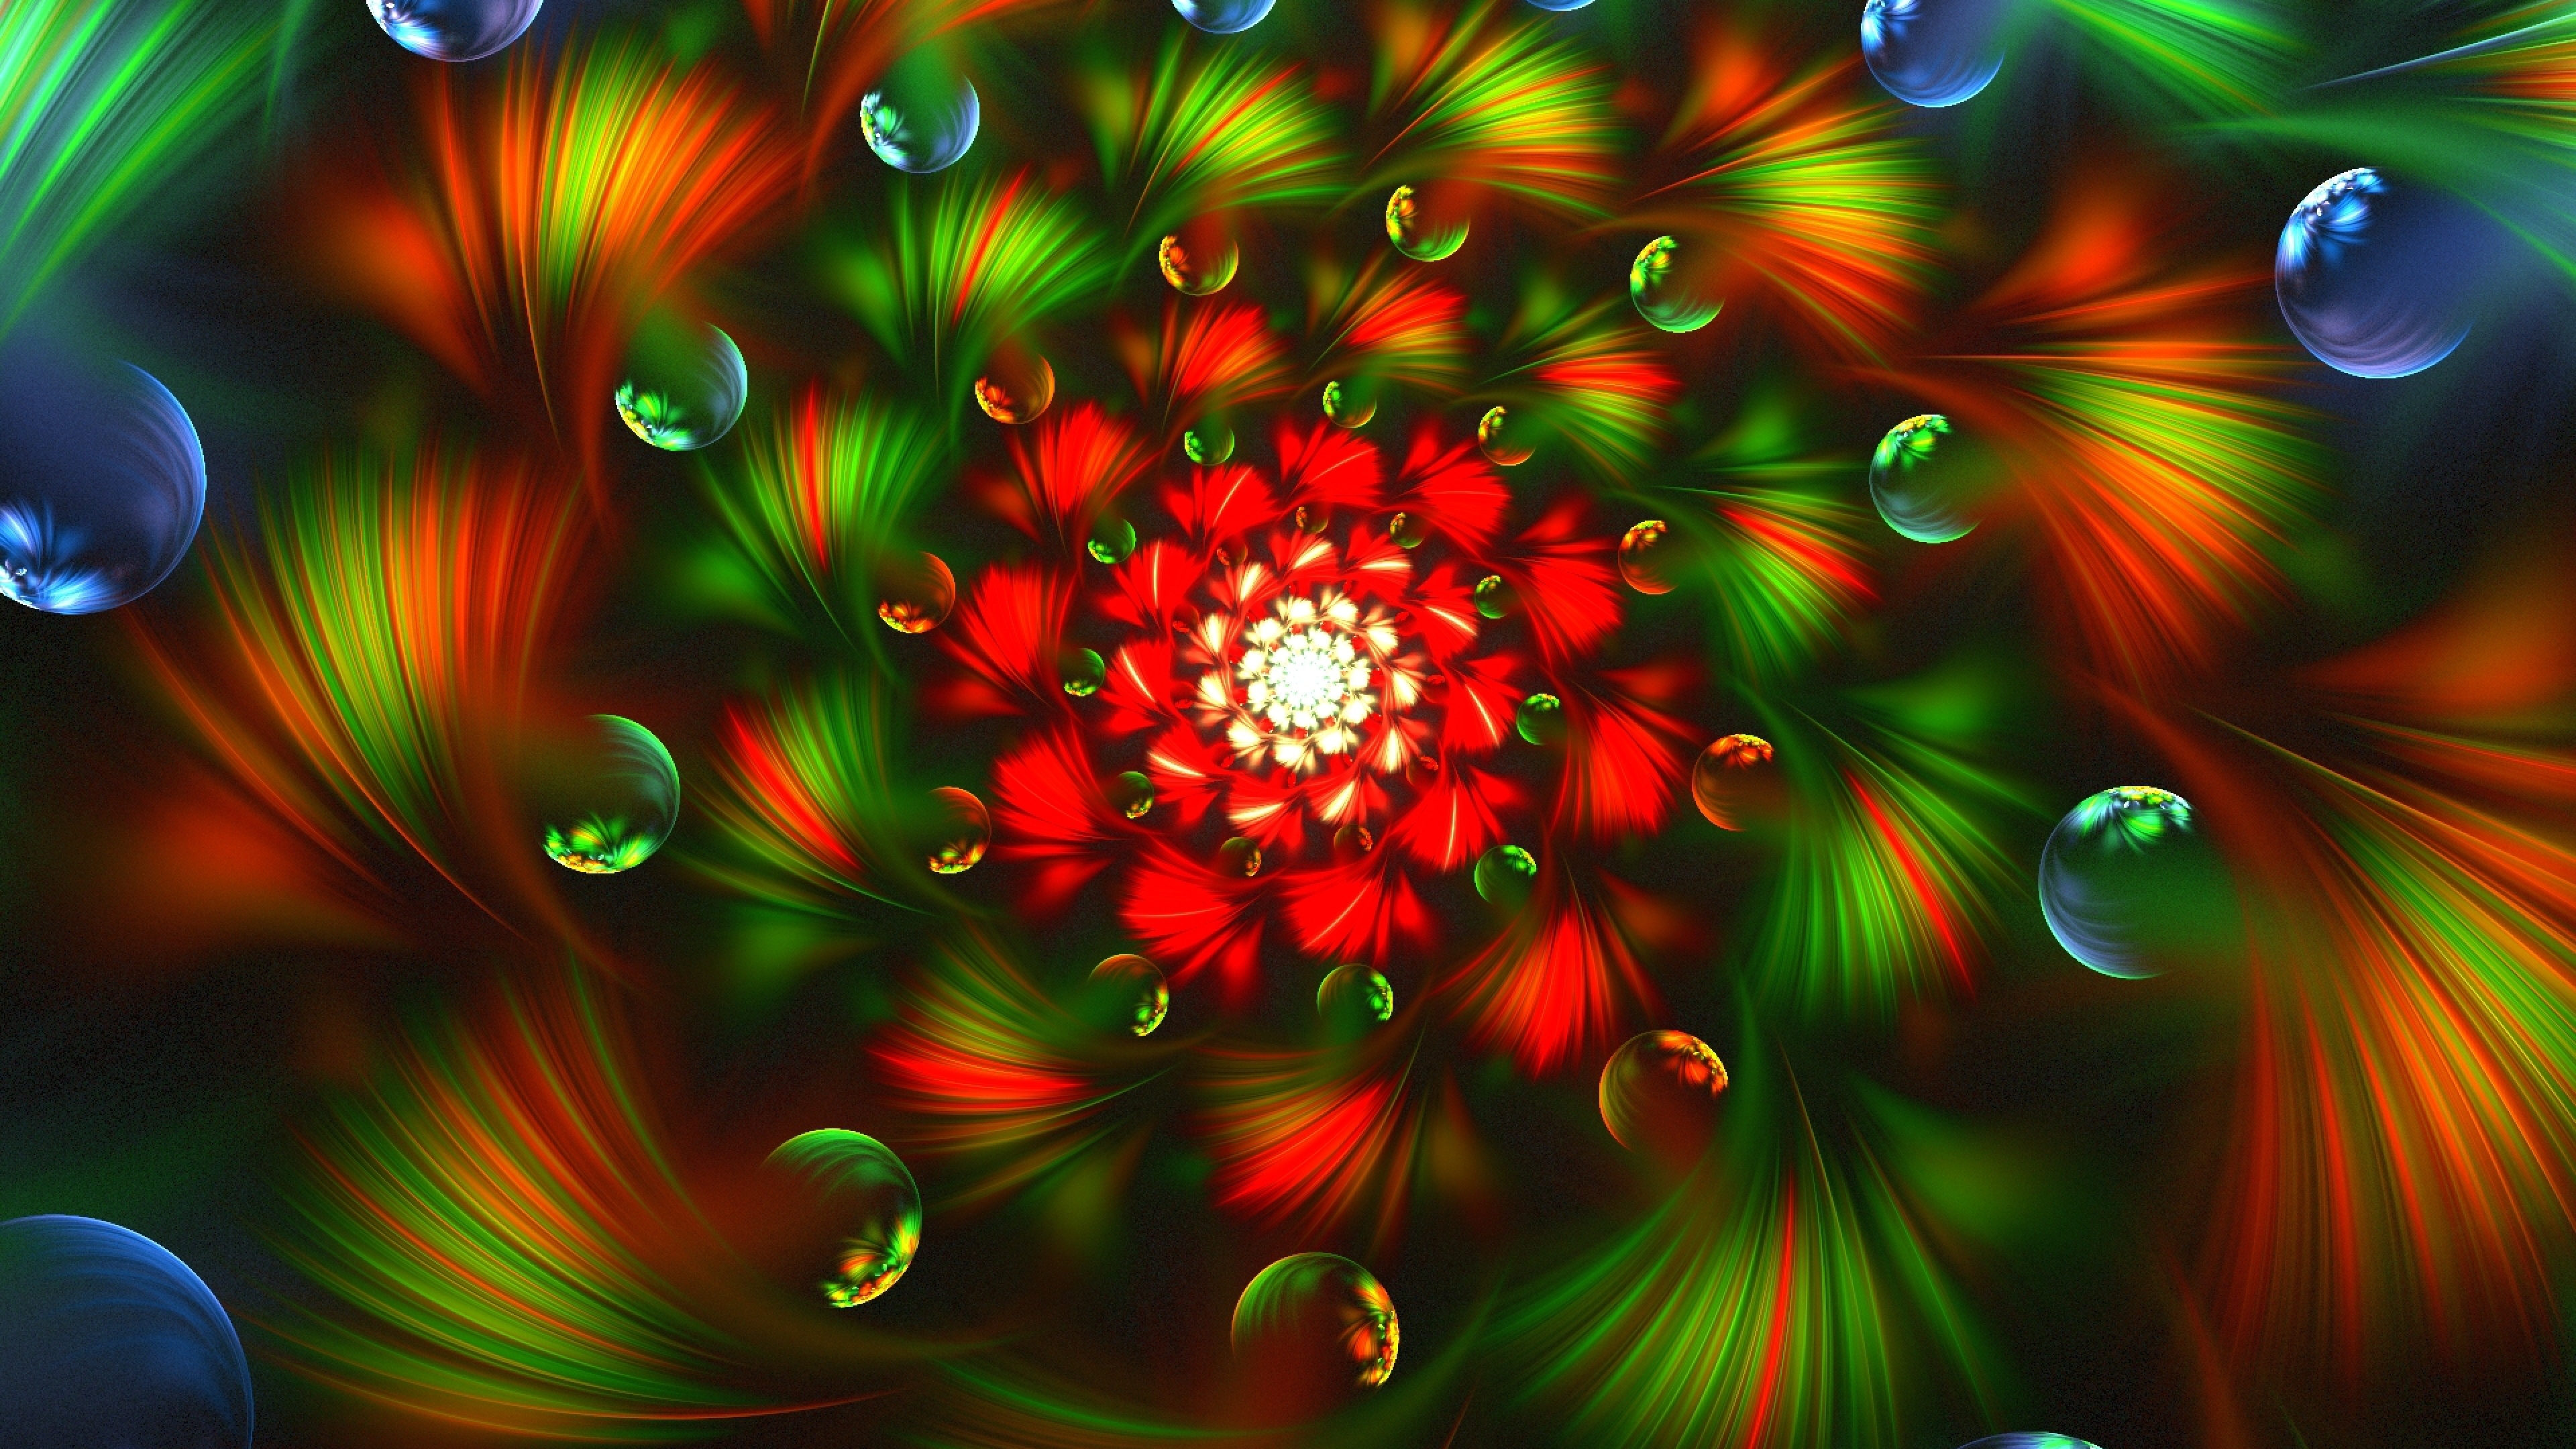 Wallpaper 3d Abstract Fractal Colorful Bright 4k